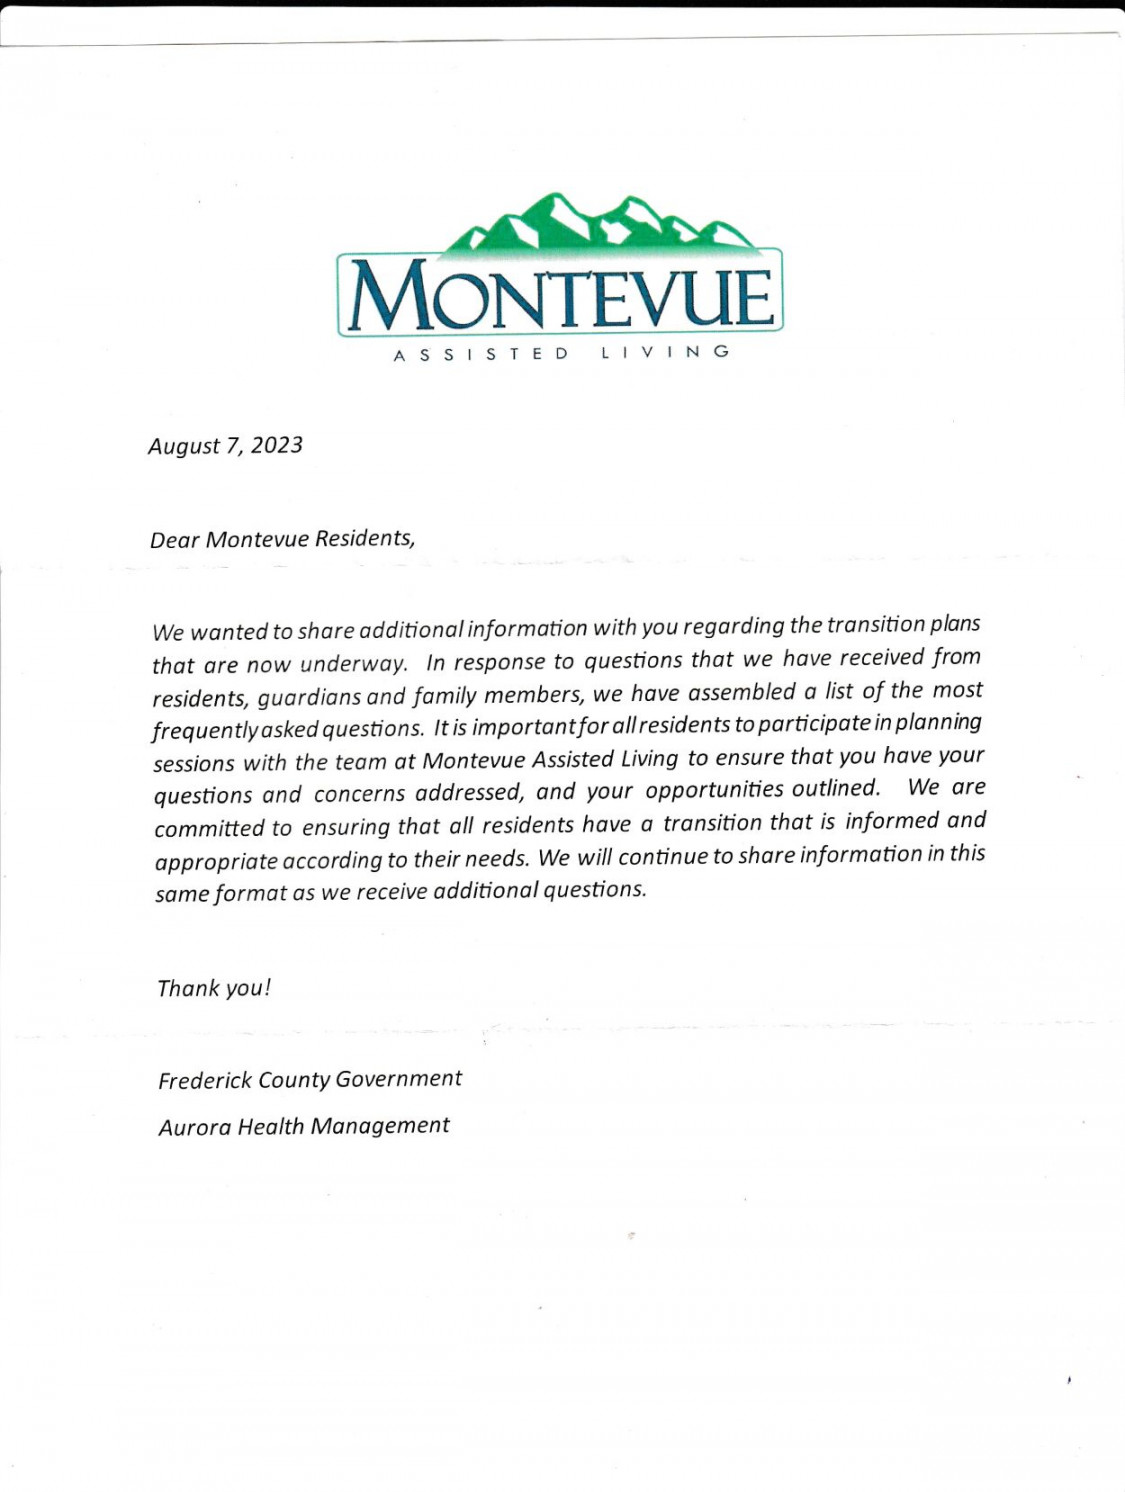 Current residents will have to leave Montevue Assisted Living next